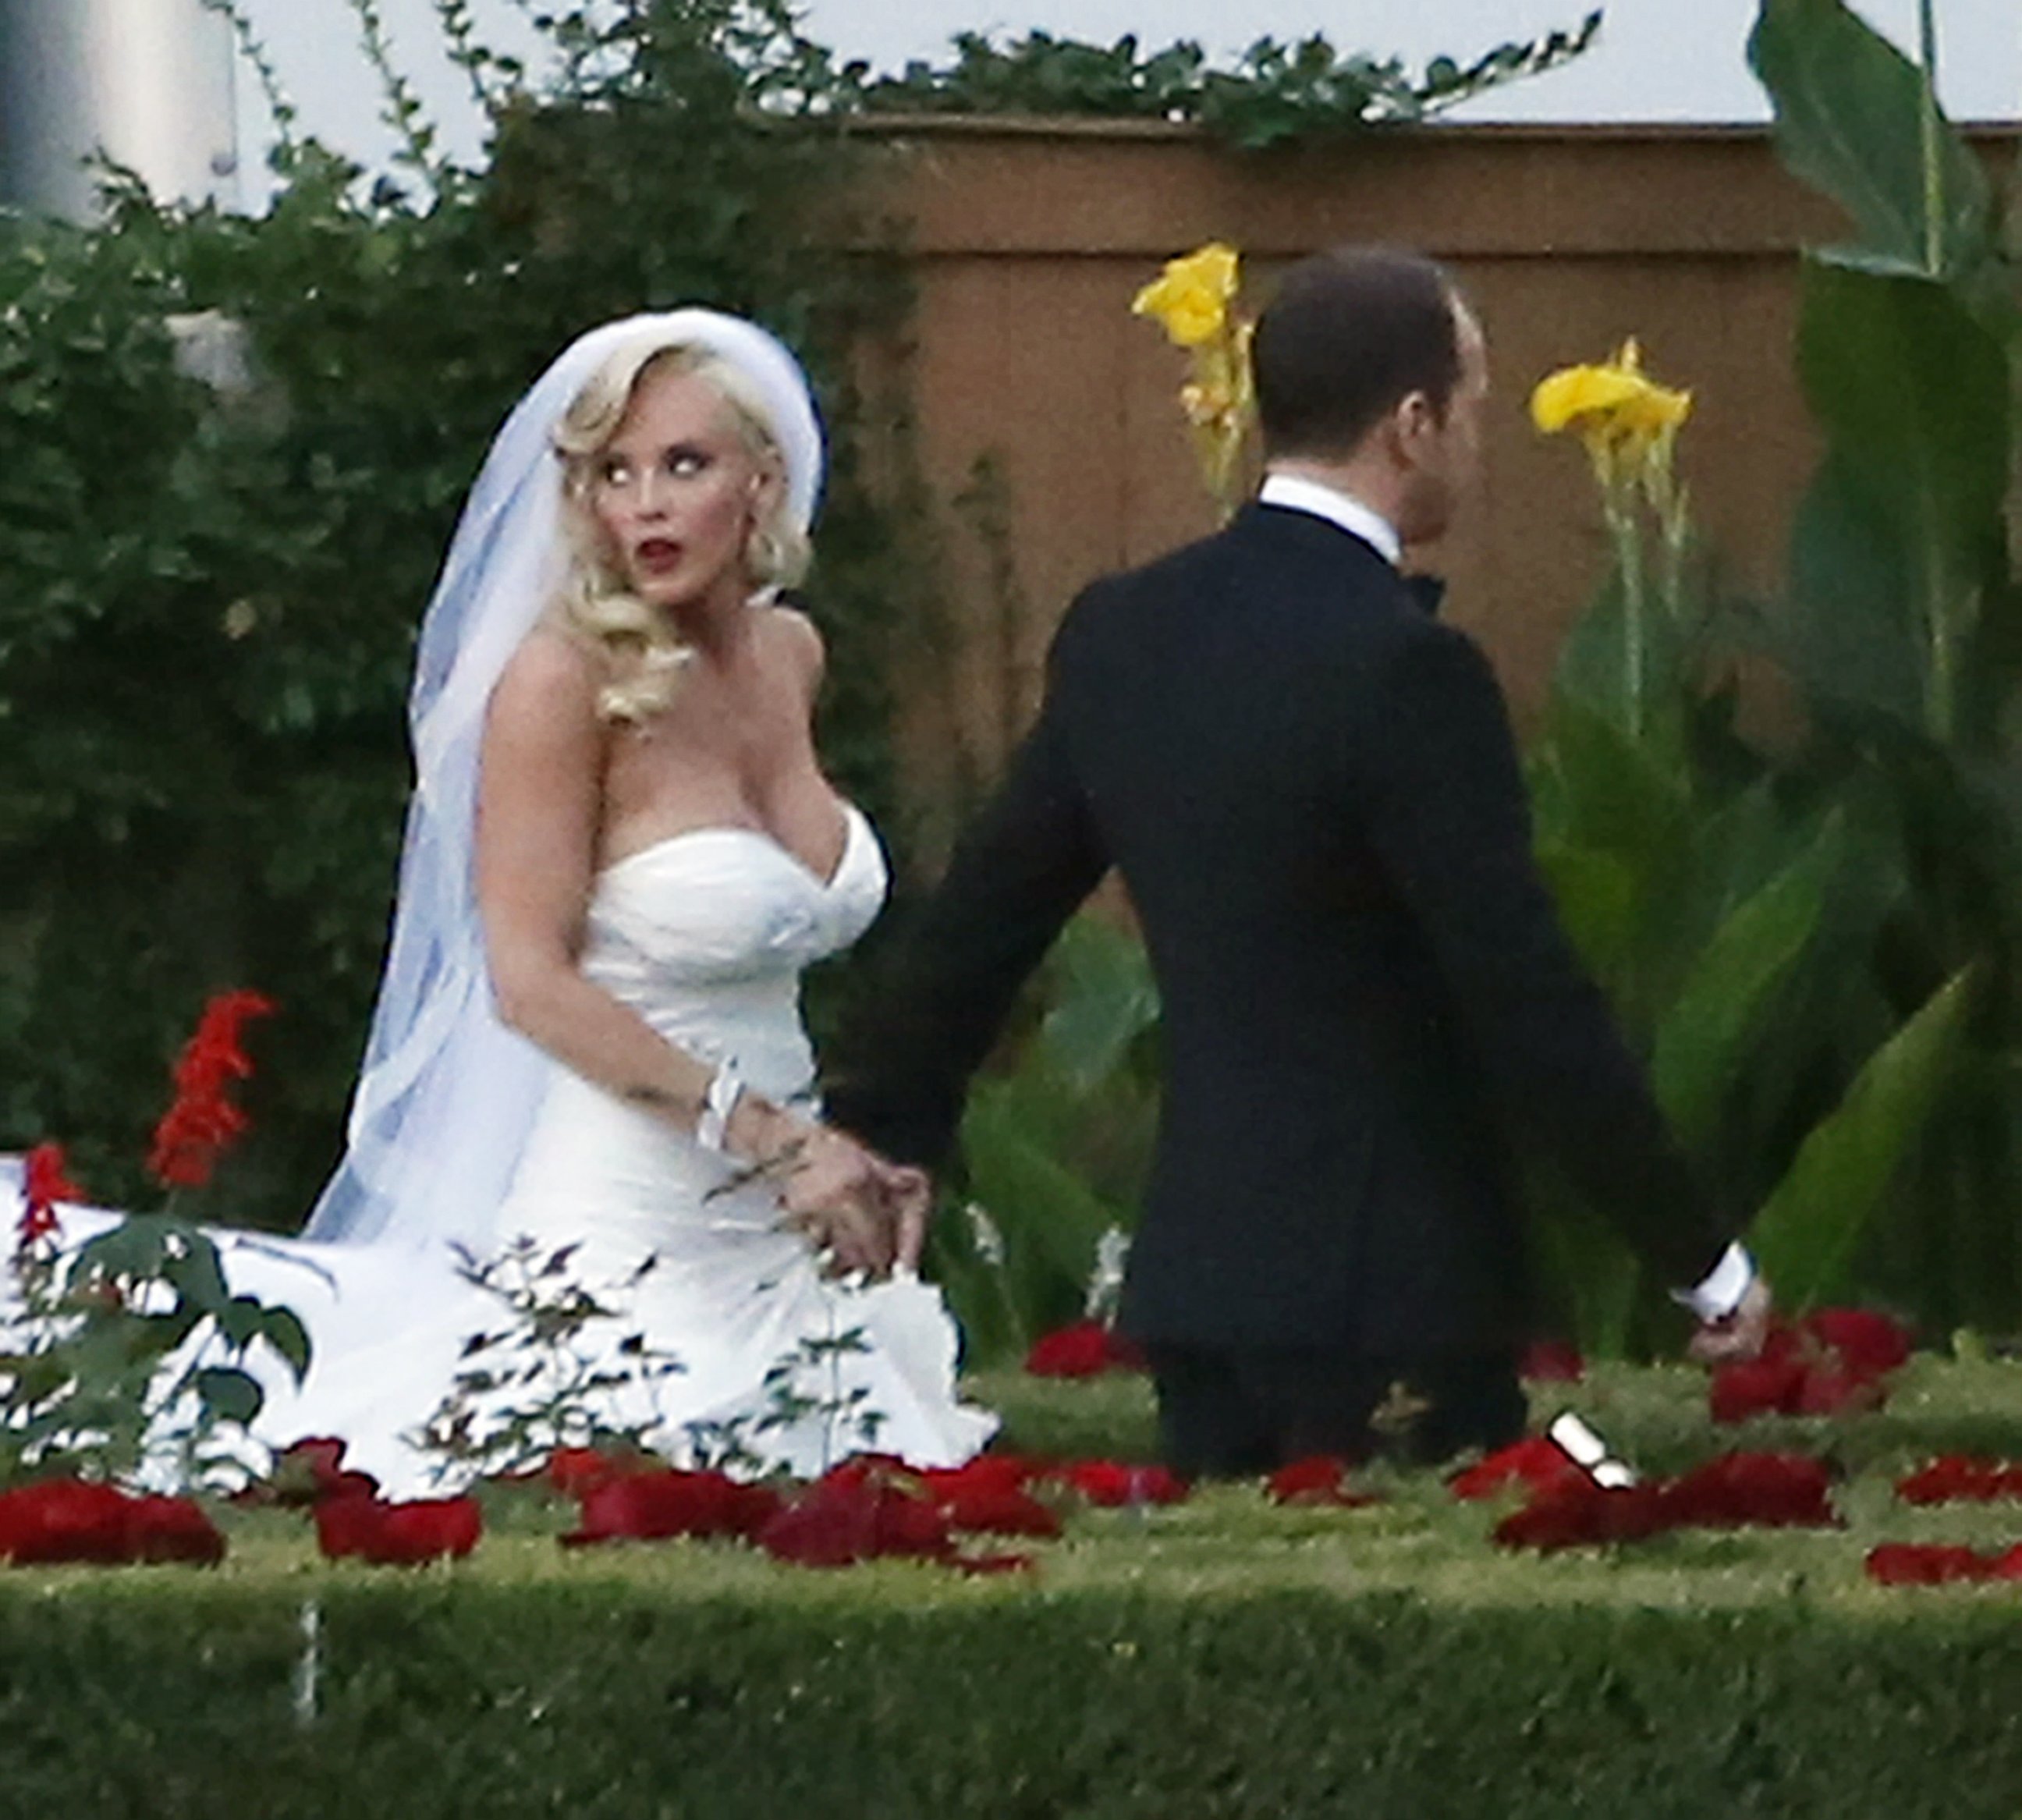 PHOTO: Jenny McCarthy and Donnie Wahlberg on their wedding in St. Charles, Ill. on Aug. 31, 2014.